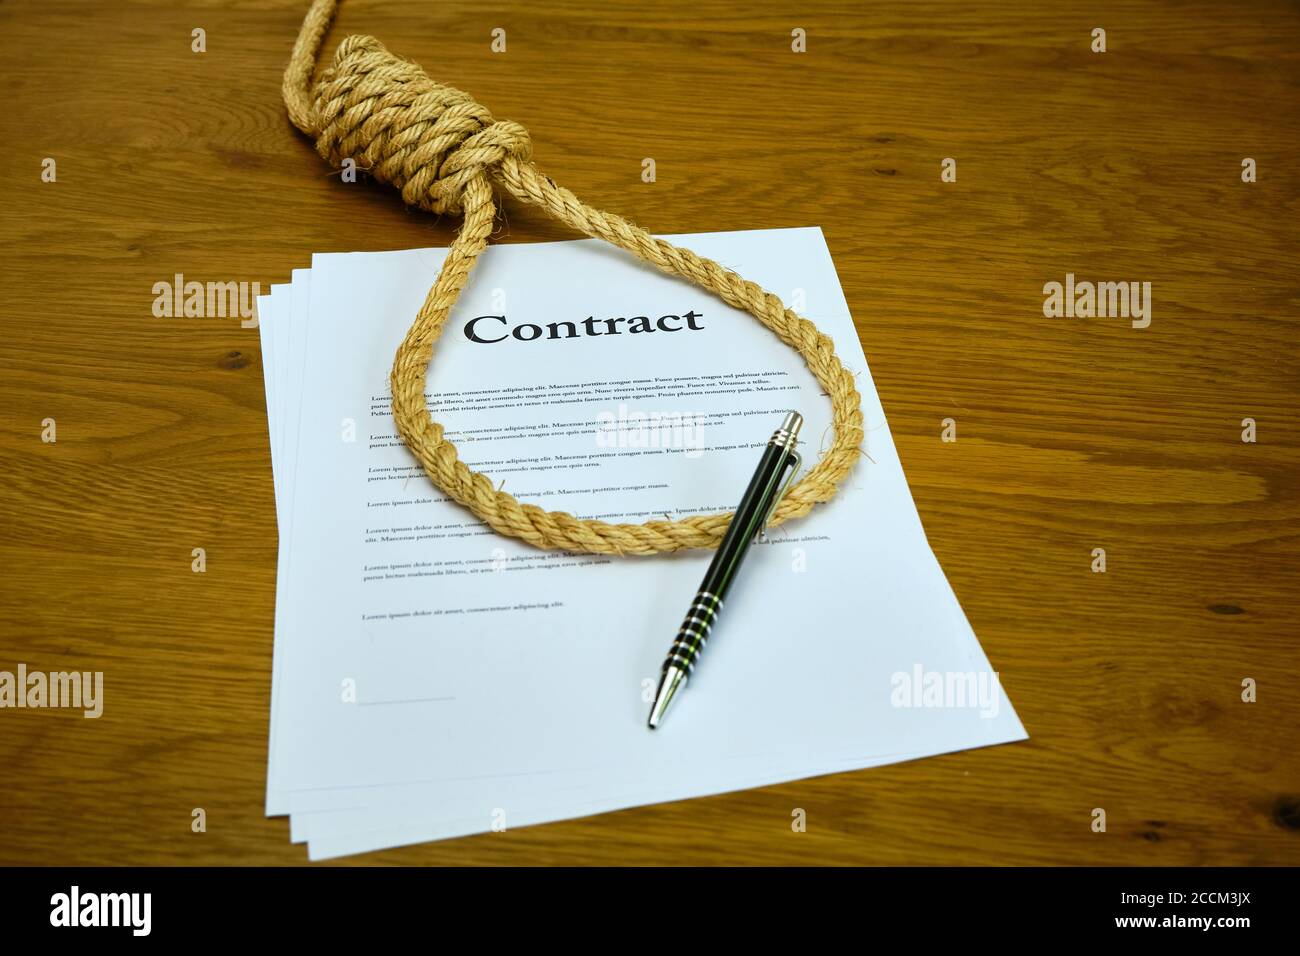 Contract with pen and rope tied in hangmans noose. Strangulation contract, unfair agreement. Lorum Ipsum text Stock Photo